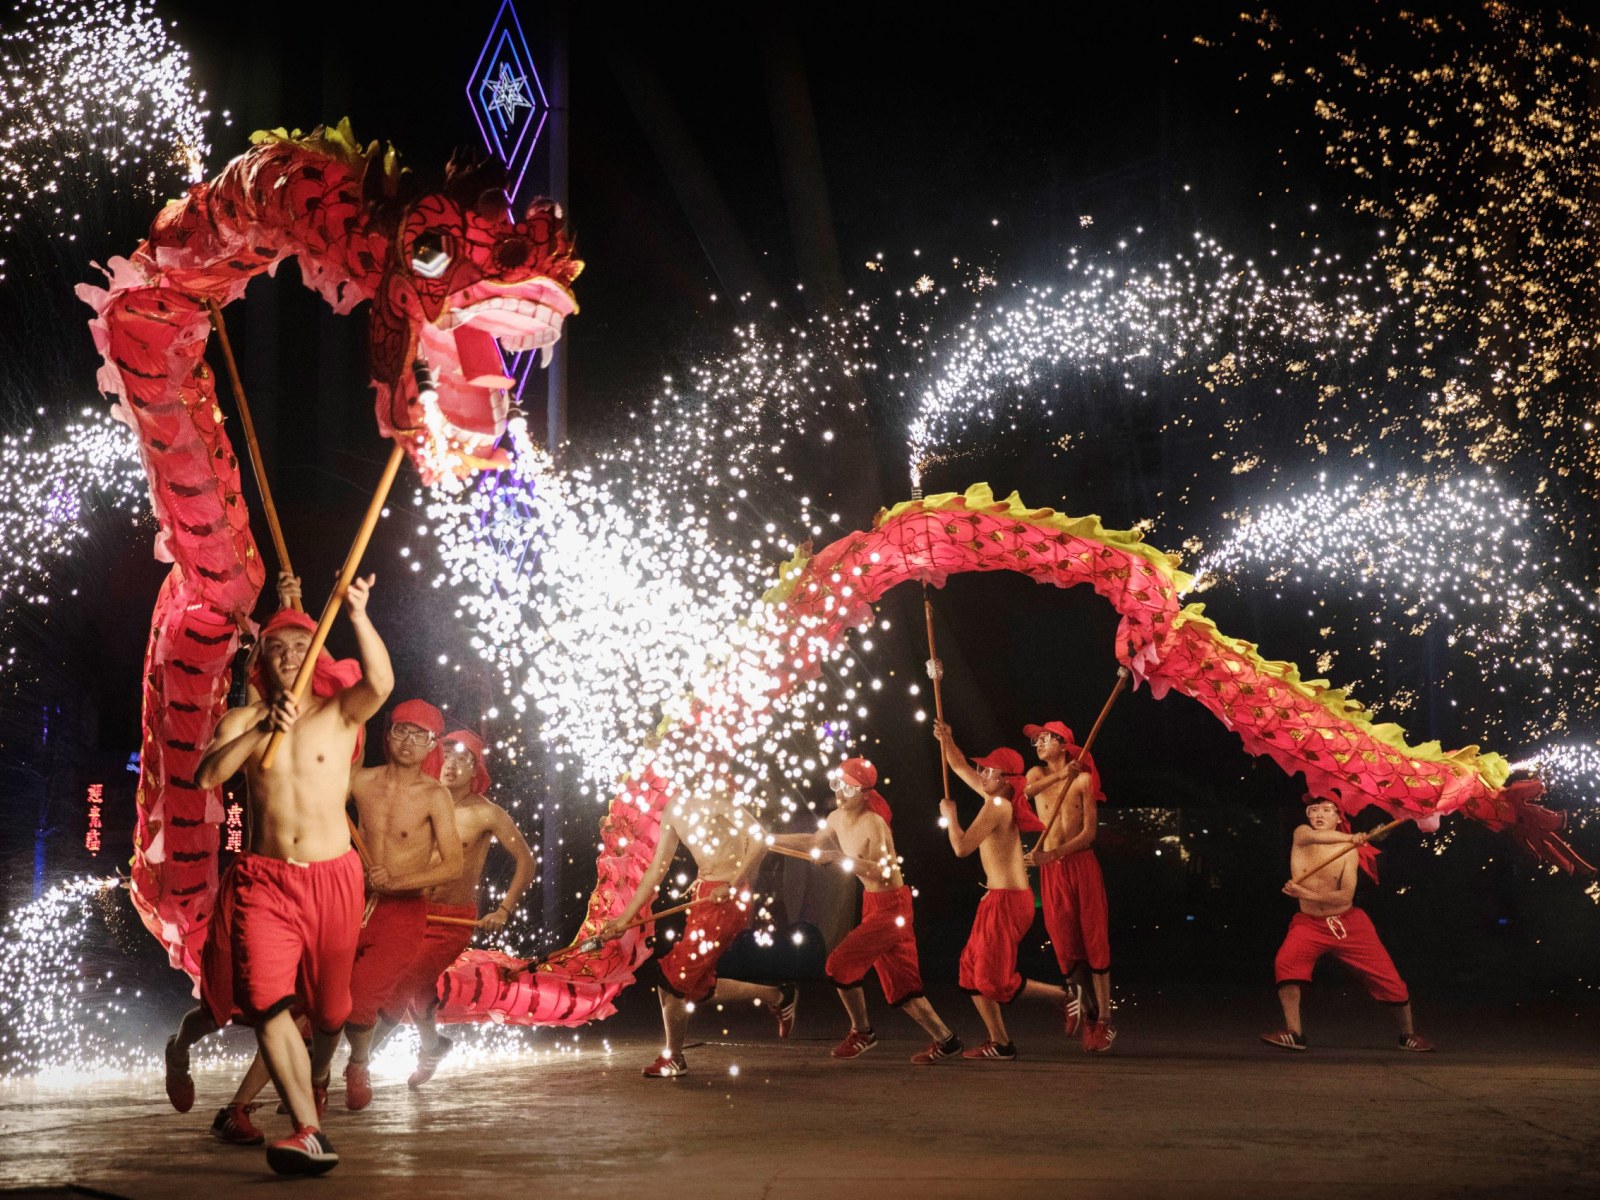 Chinese New Year 2019: Facts, Sayings to Celebrate the Year of the Pig